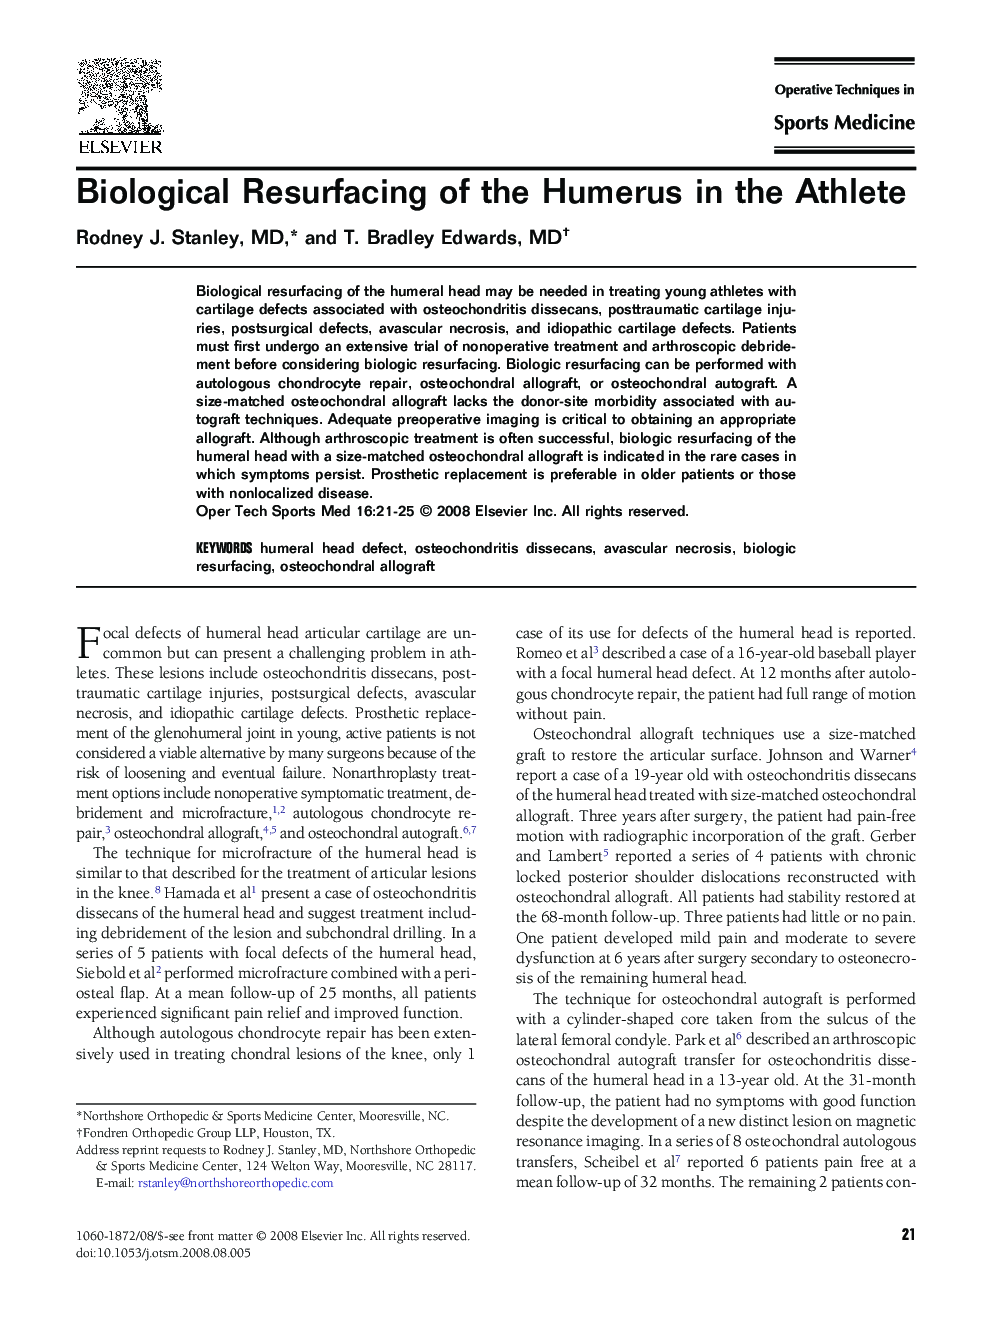 Biological Resurfacing of the Humerus in the Athlete